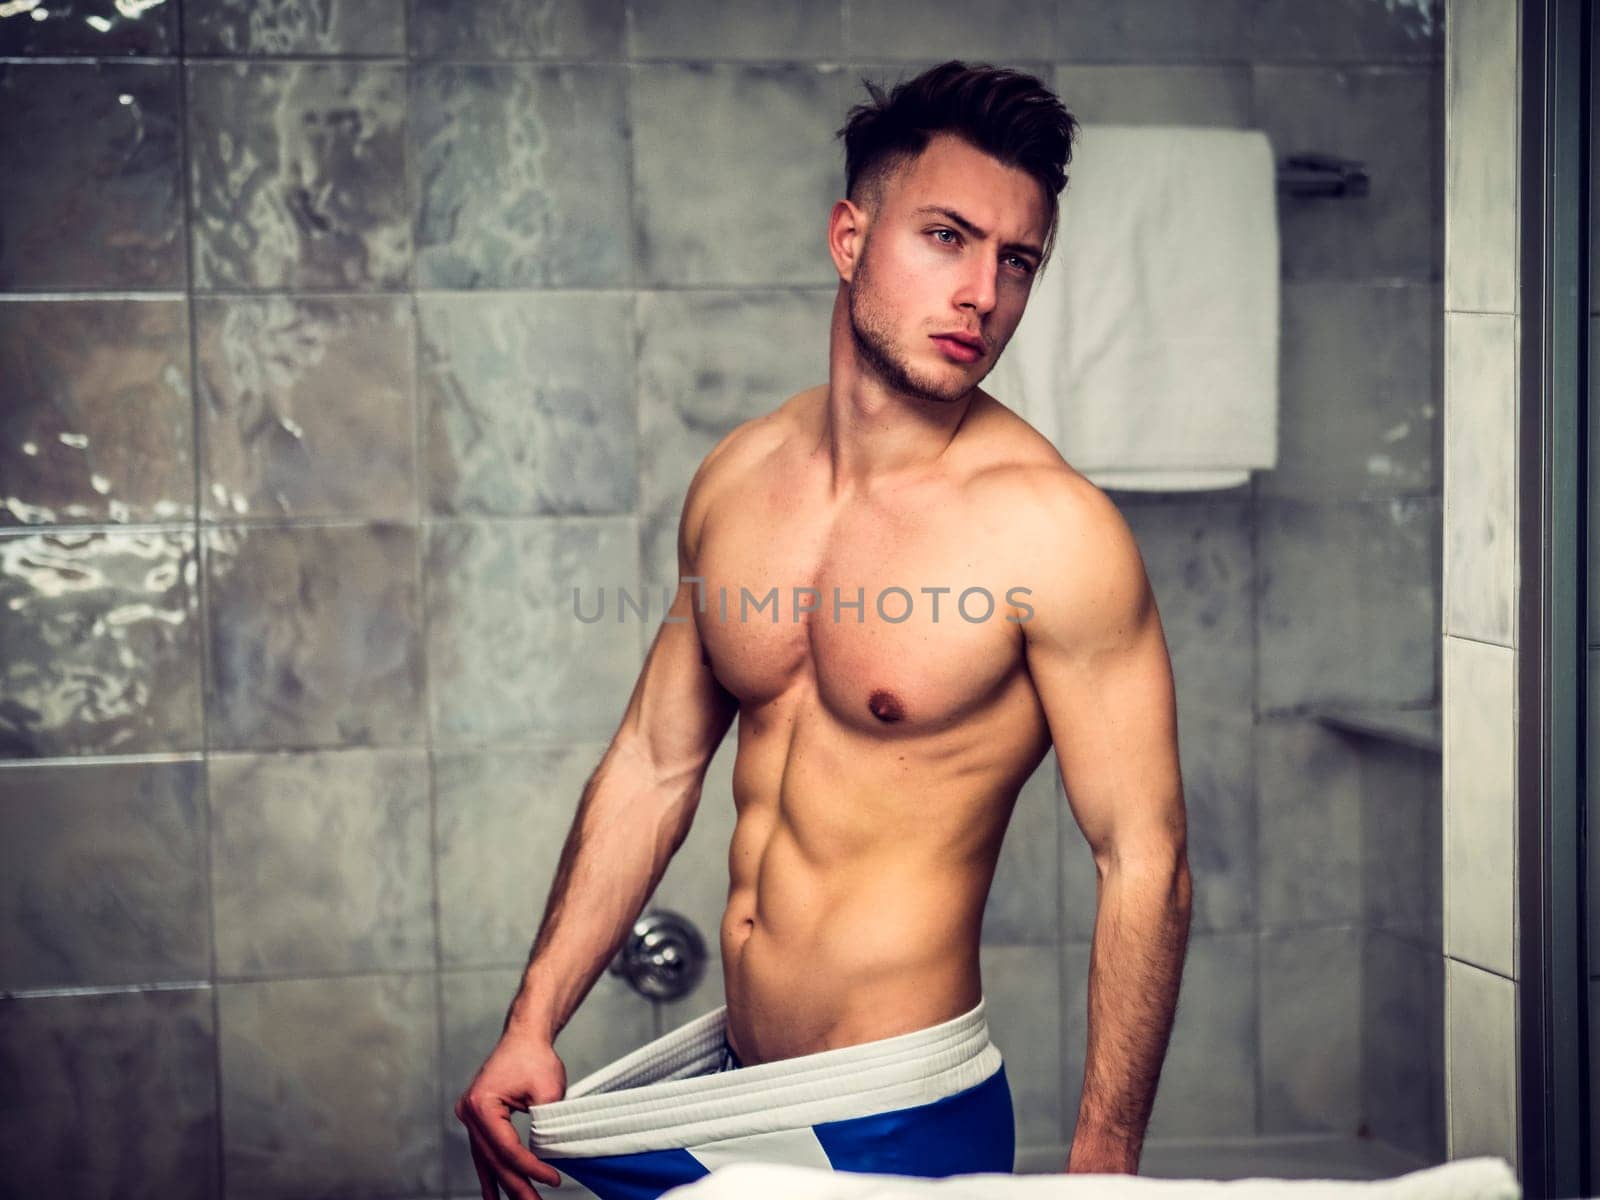 A shirtless man standing in front of a shower